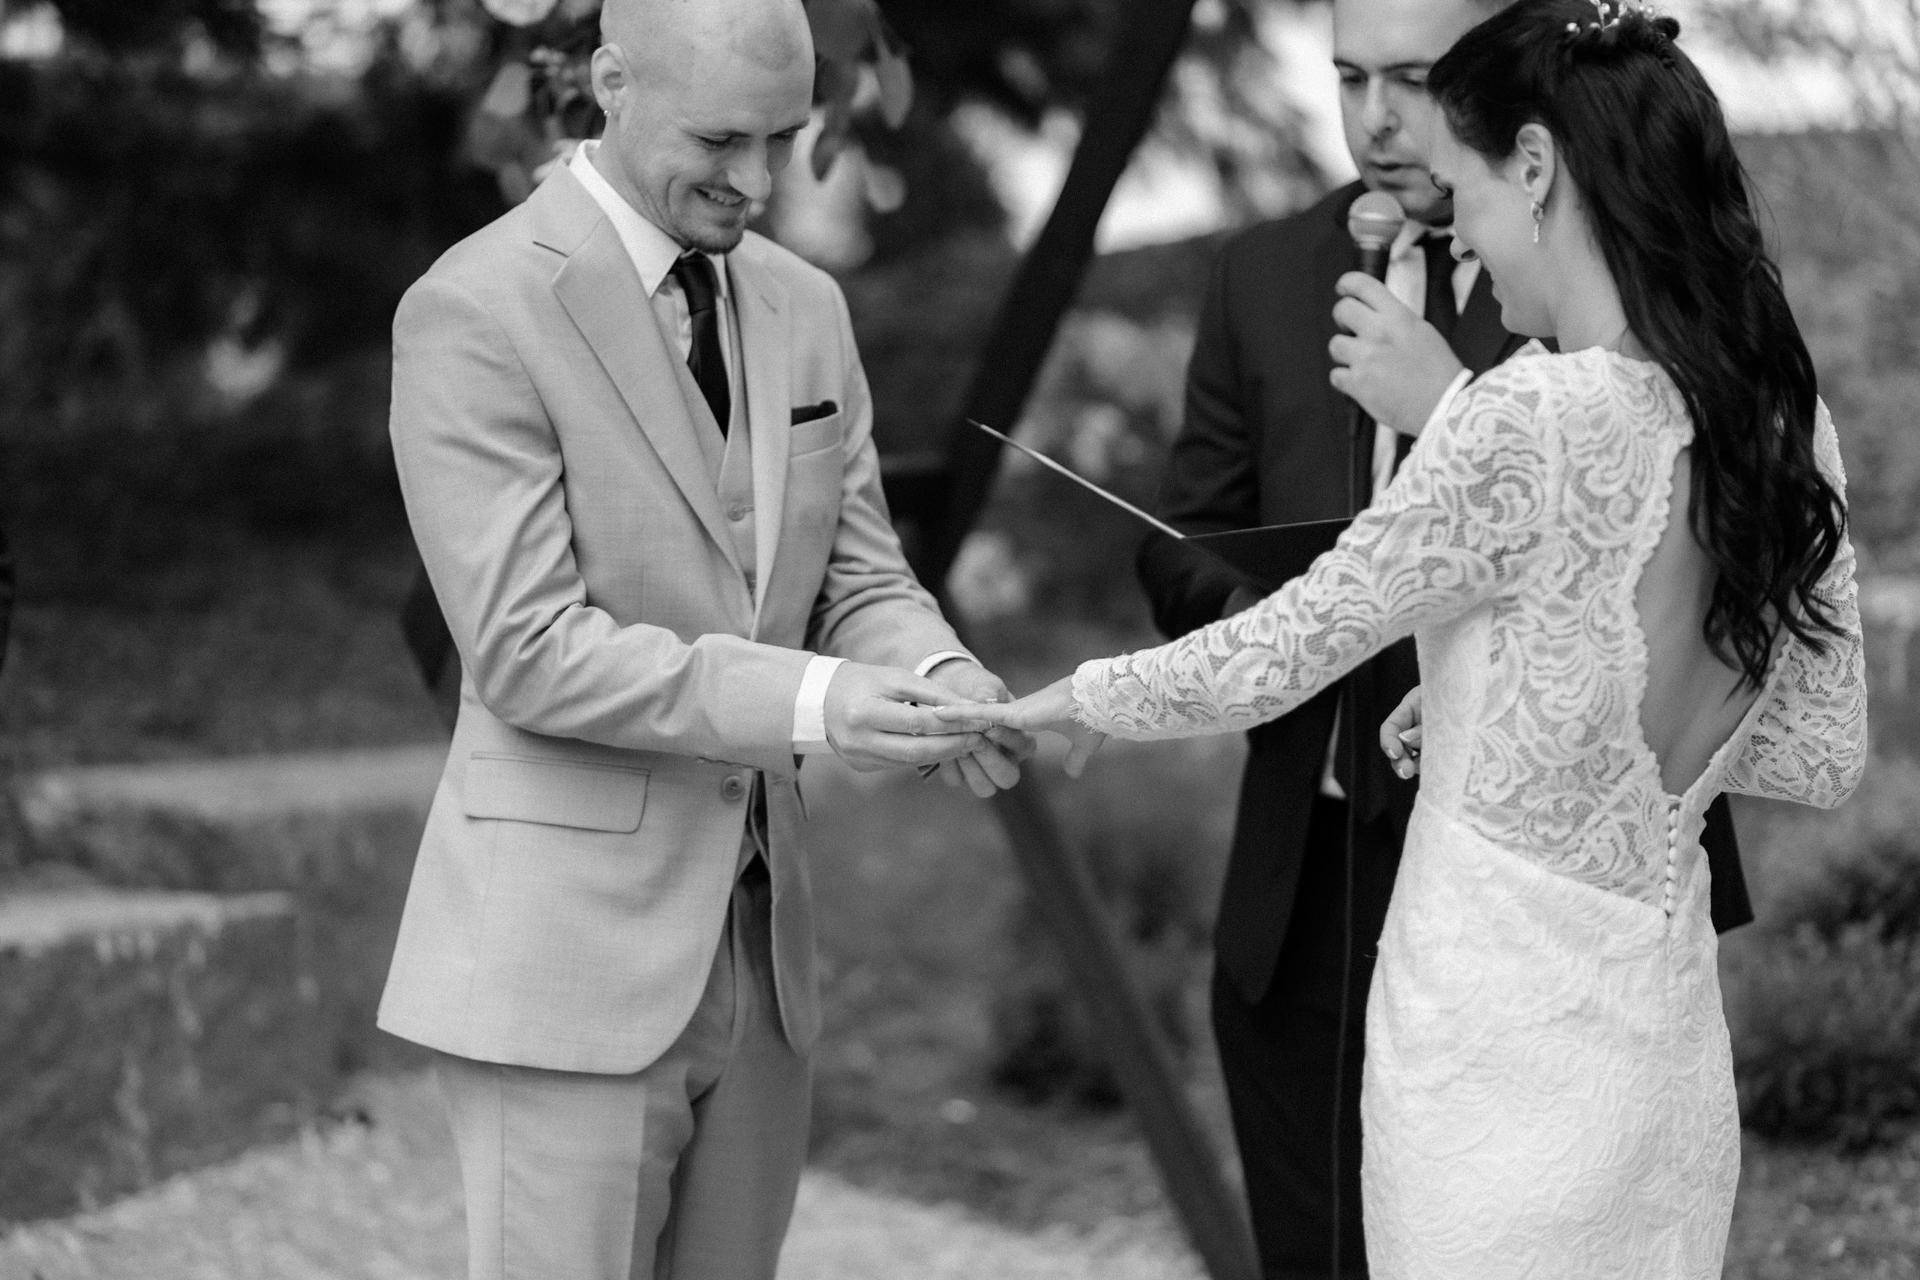 Bride and groom exchanged the wedding rings with their close friend as their wedding officiant